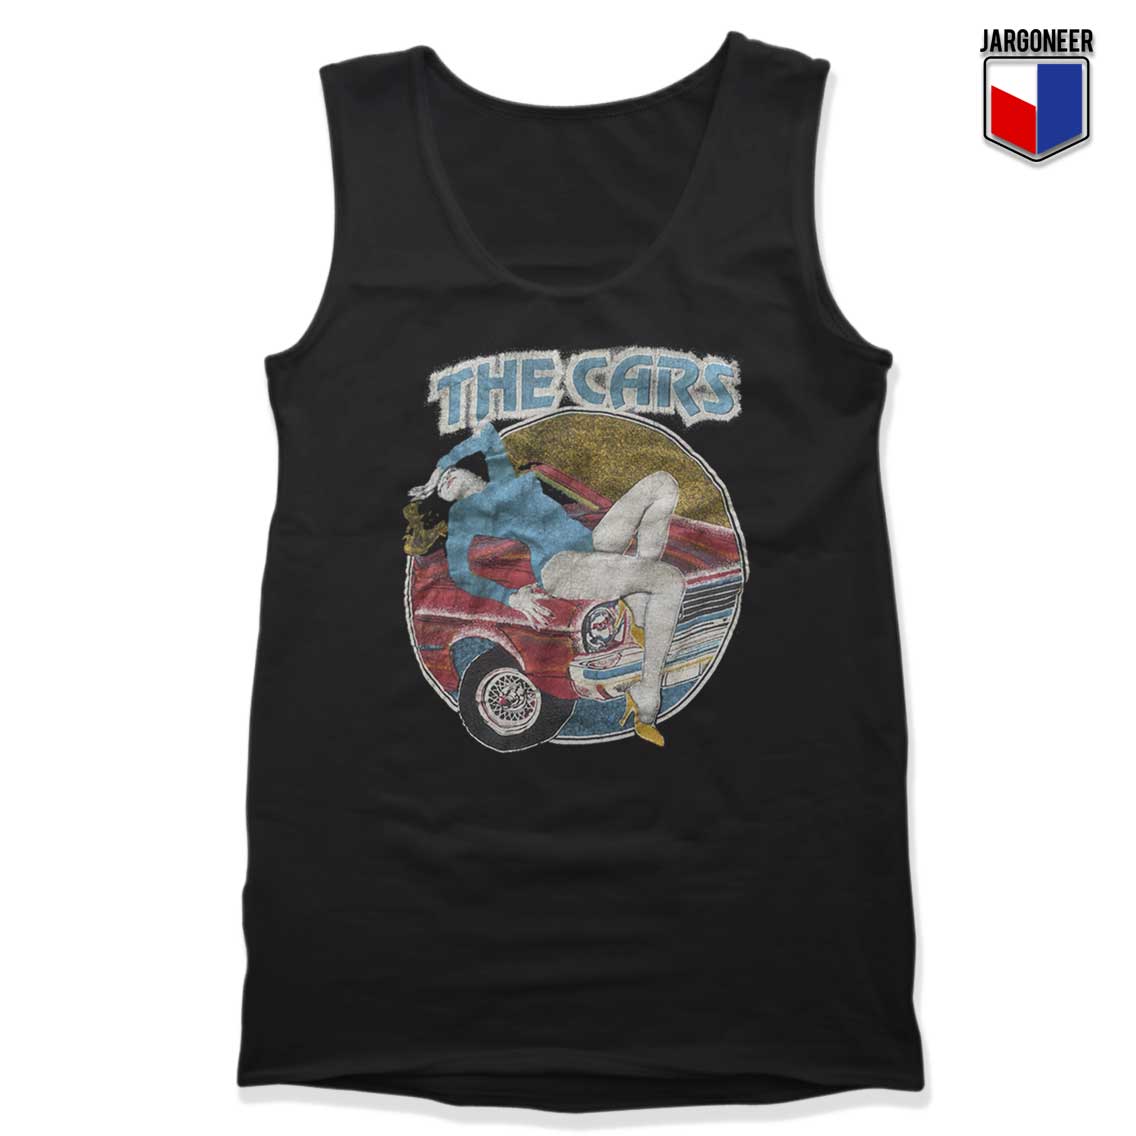 Vintage 70s The Cars band S Candy o New Wave Punk Tank Top - Shop Unique Graphic Cool Shirt Designs